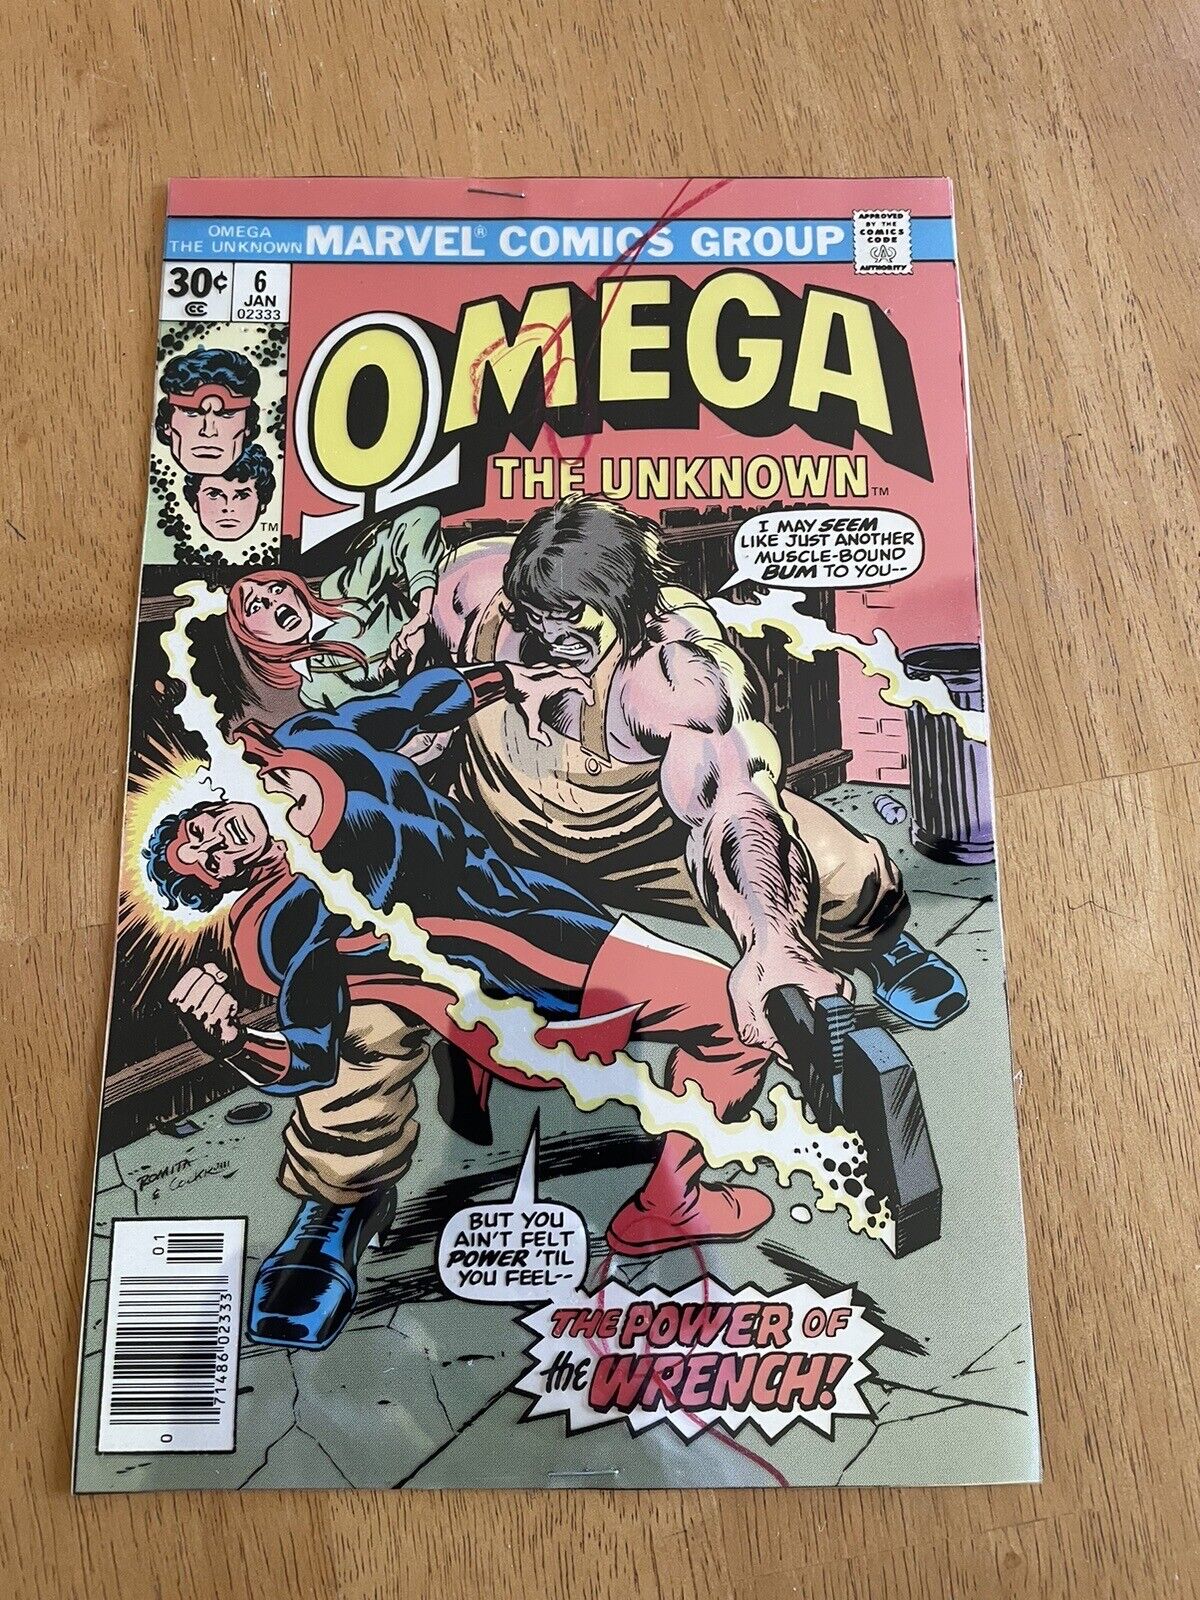 OMEGA THE UNKNOWN #6 COVER ART 4 color acetate 1977 ROMITA COCKRUM WRENCH